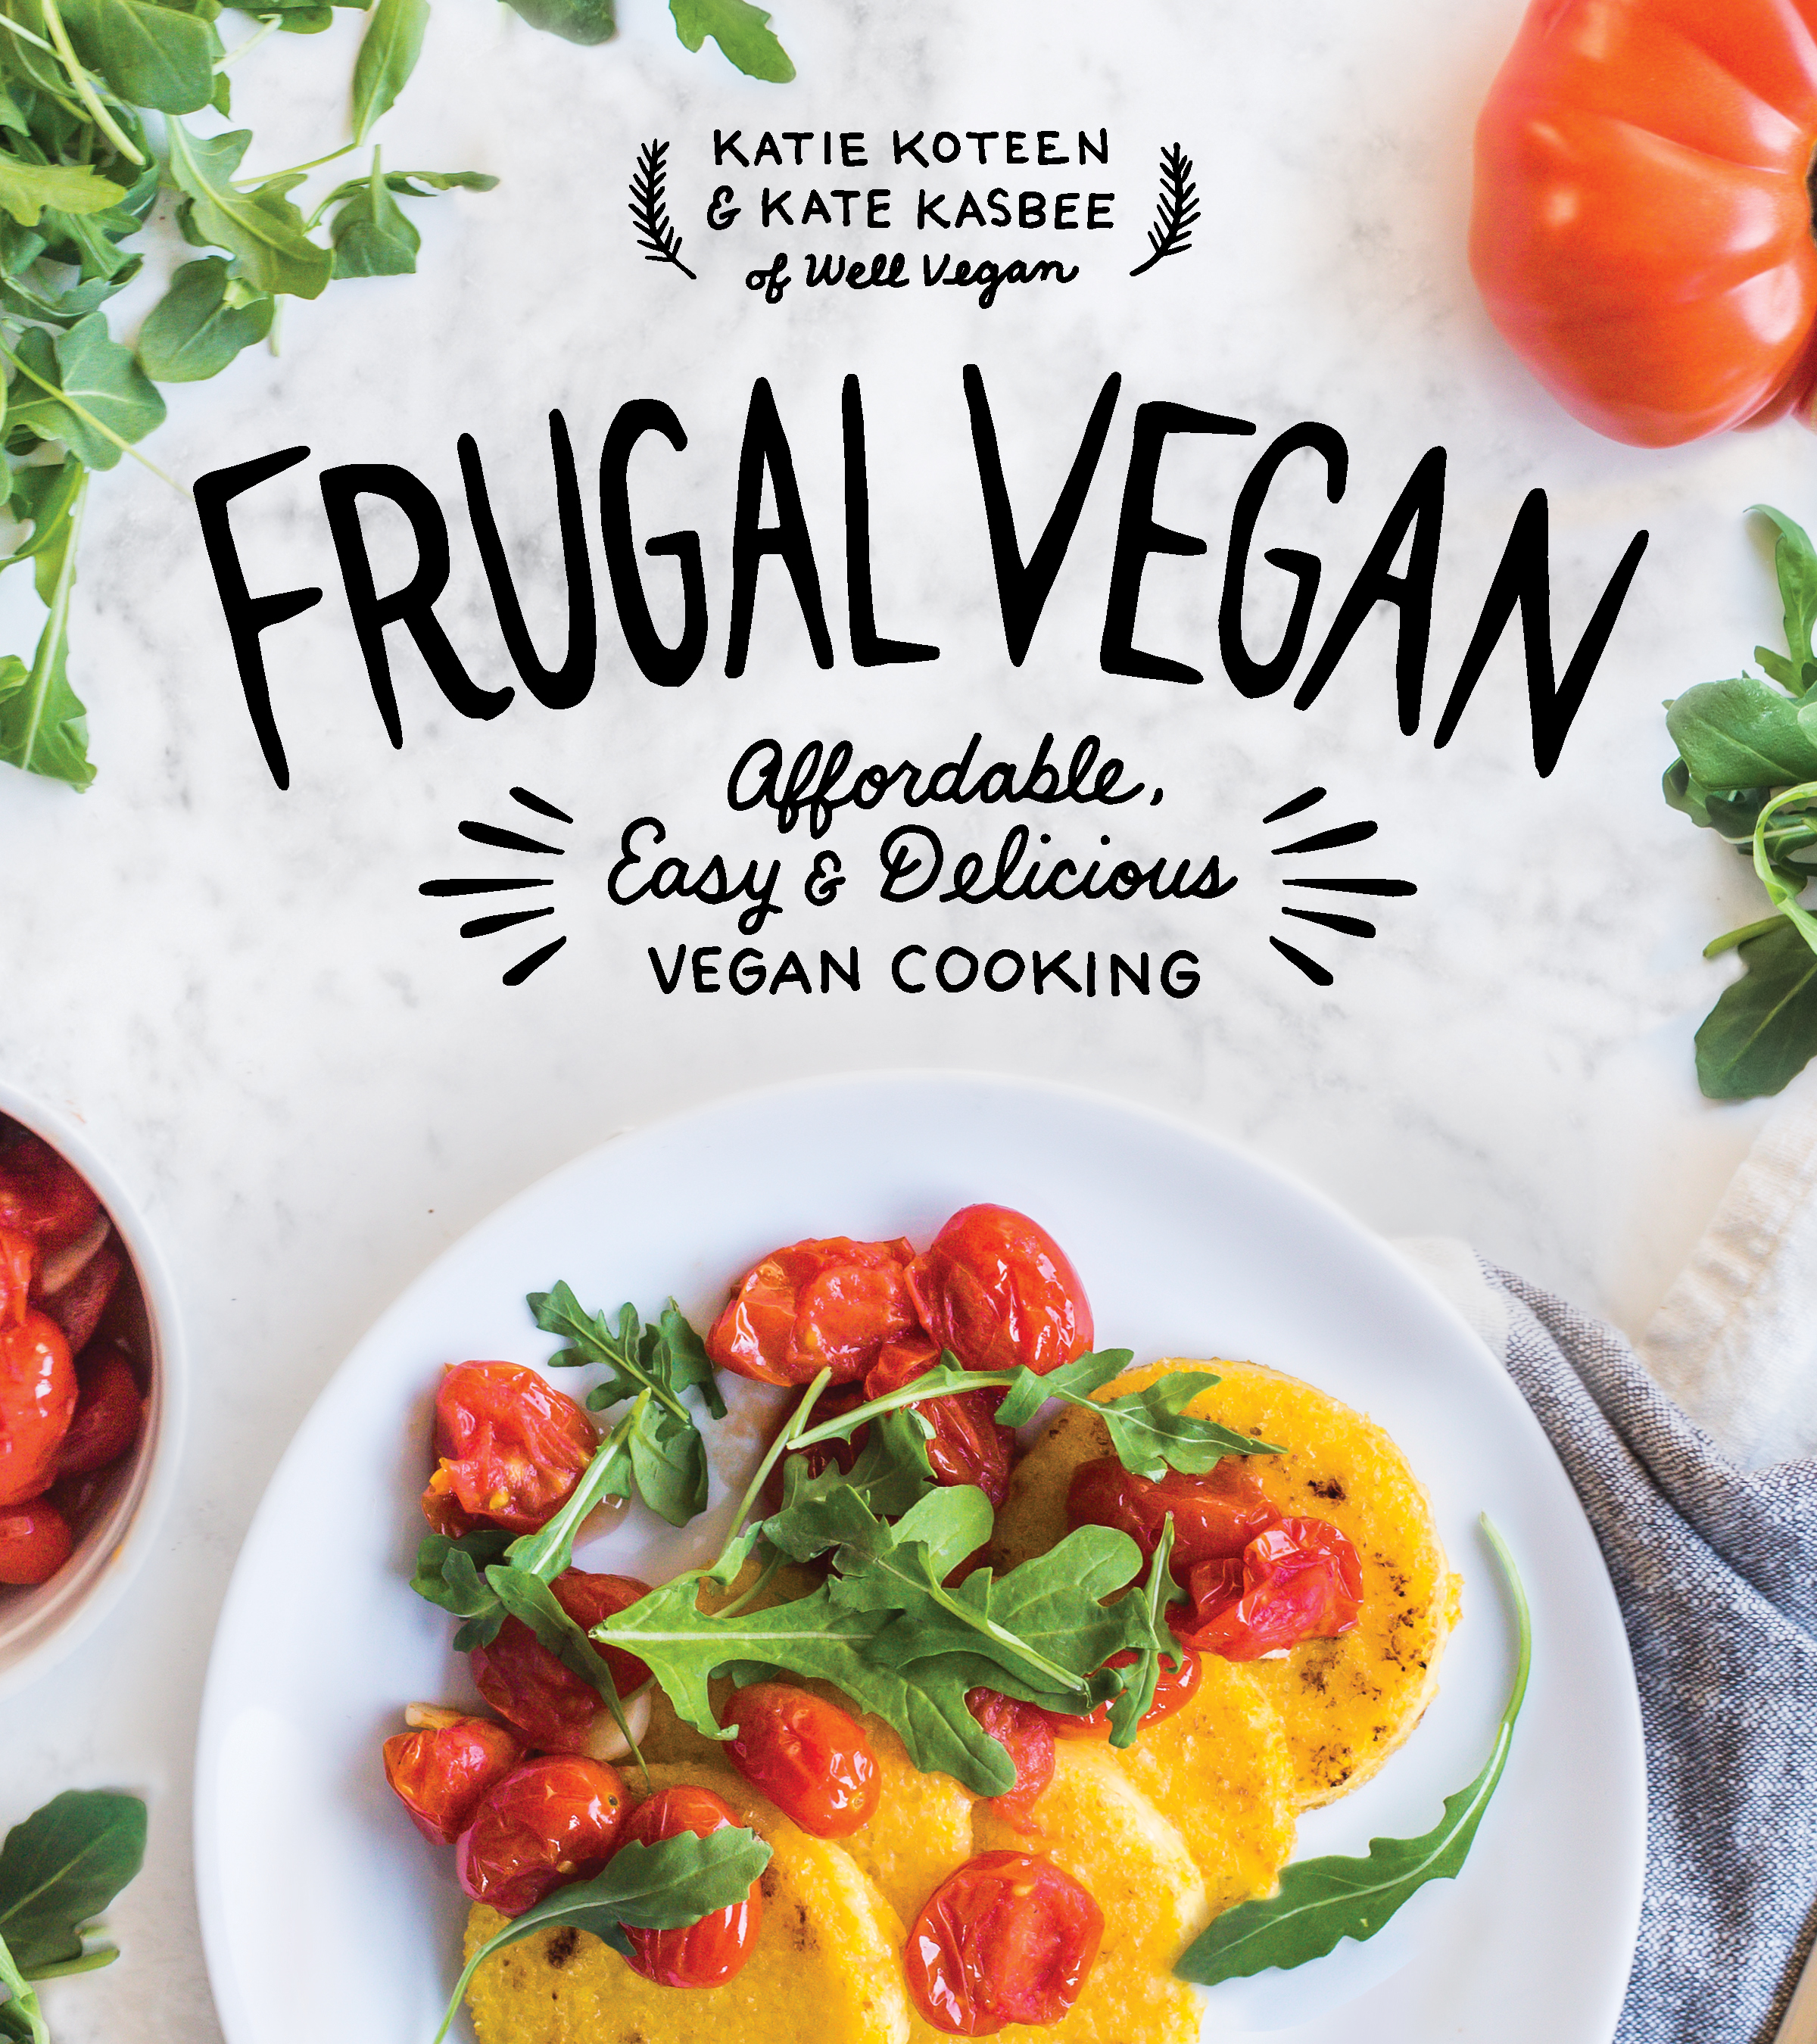 Frugal Vegan features 99 affordable and delicious vegan recipes. This cookbook offers an amazing selection of delicious vegan recipes that won't break the bank.